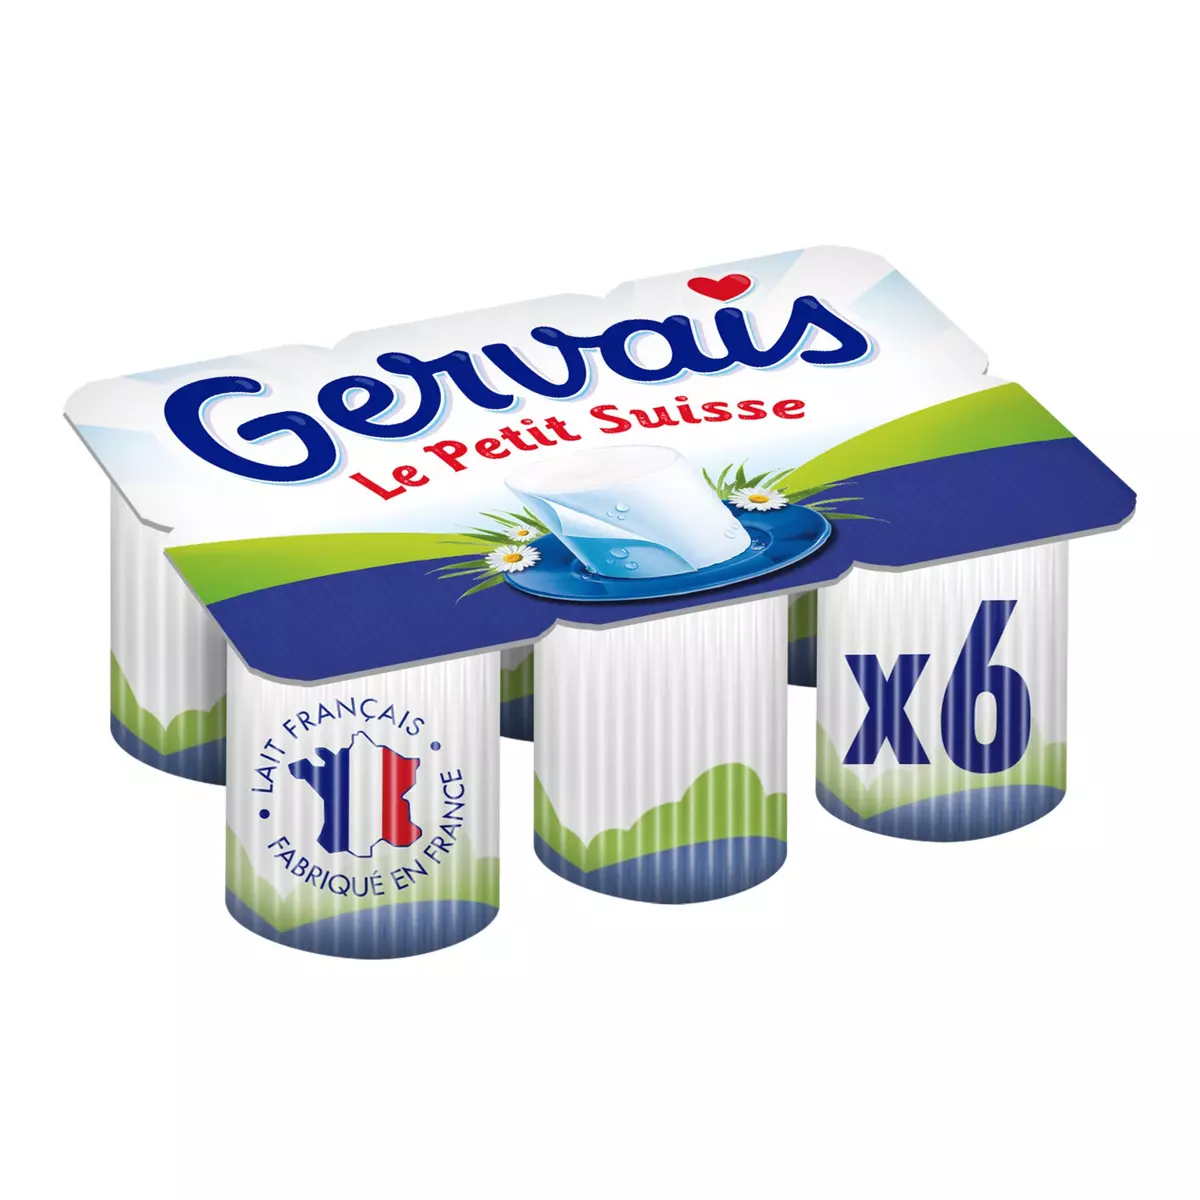 GERVAIS Petits suisses nature 3.9% mg 12x60g